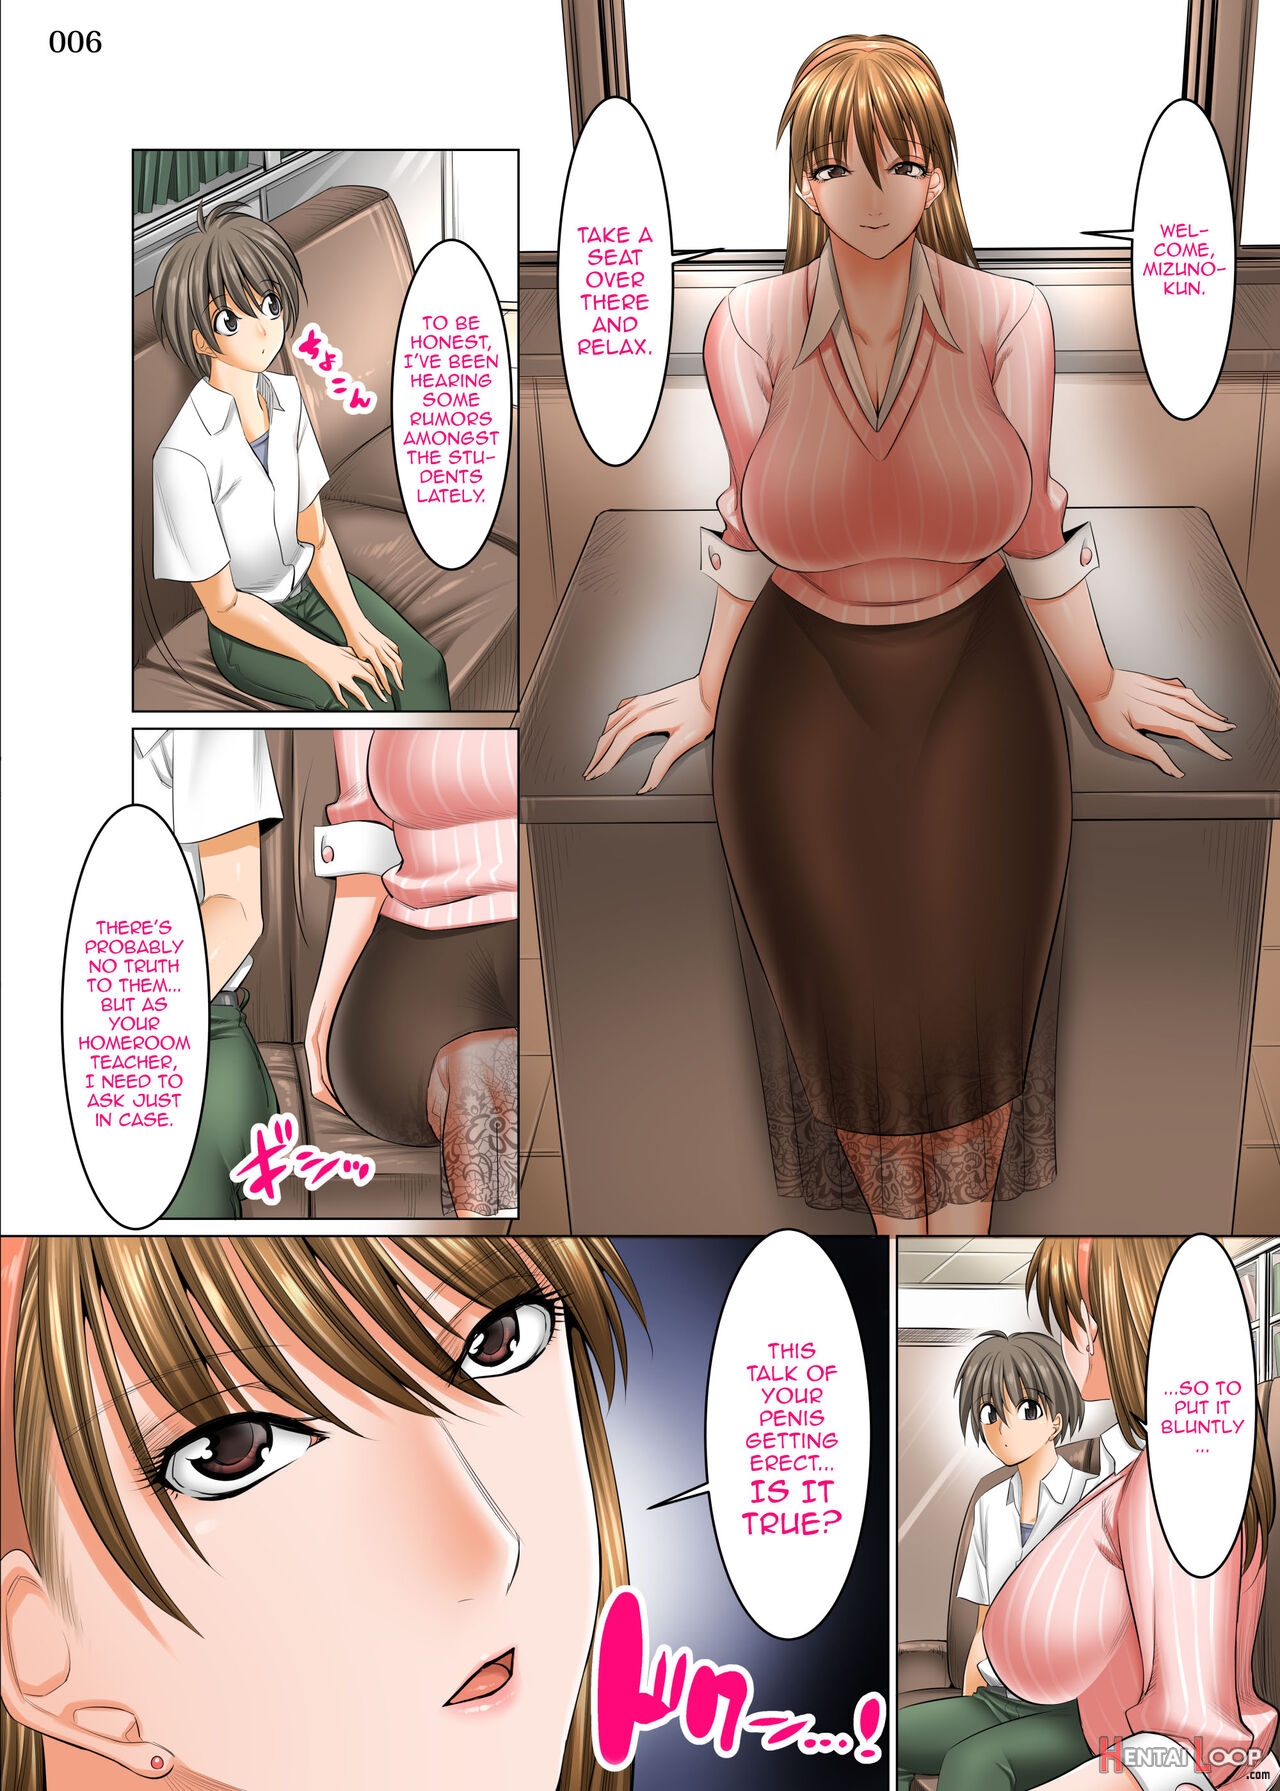 A World Where All Men But Me Are Impotent - Homeroom Teacher Edition page 5